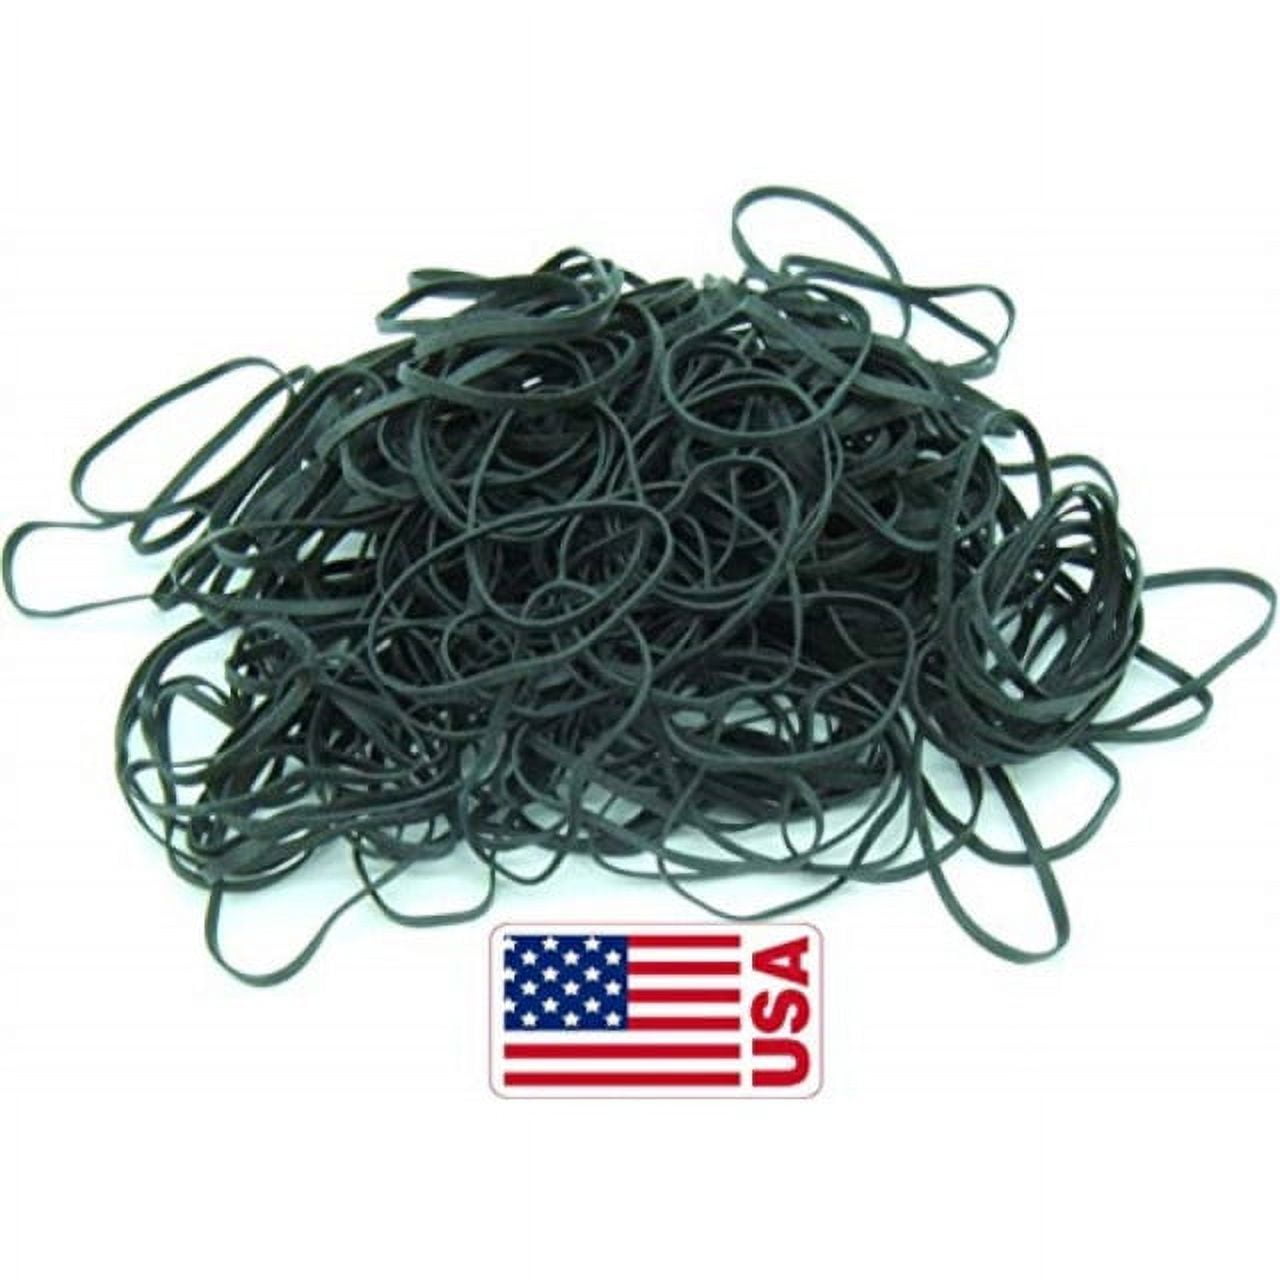 Thick Rubber Bands Heavy Duty - 50 Pieces Size 84 Black Wide Strong Elastic  Industrial Tactical Rubber Bands with UV Heat Cold Resistant for Military